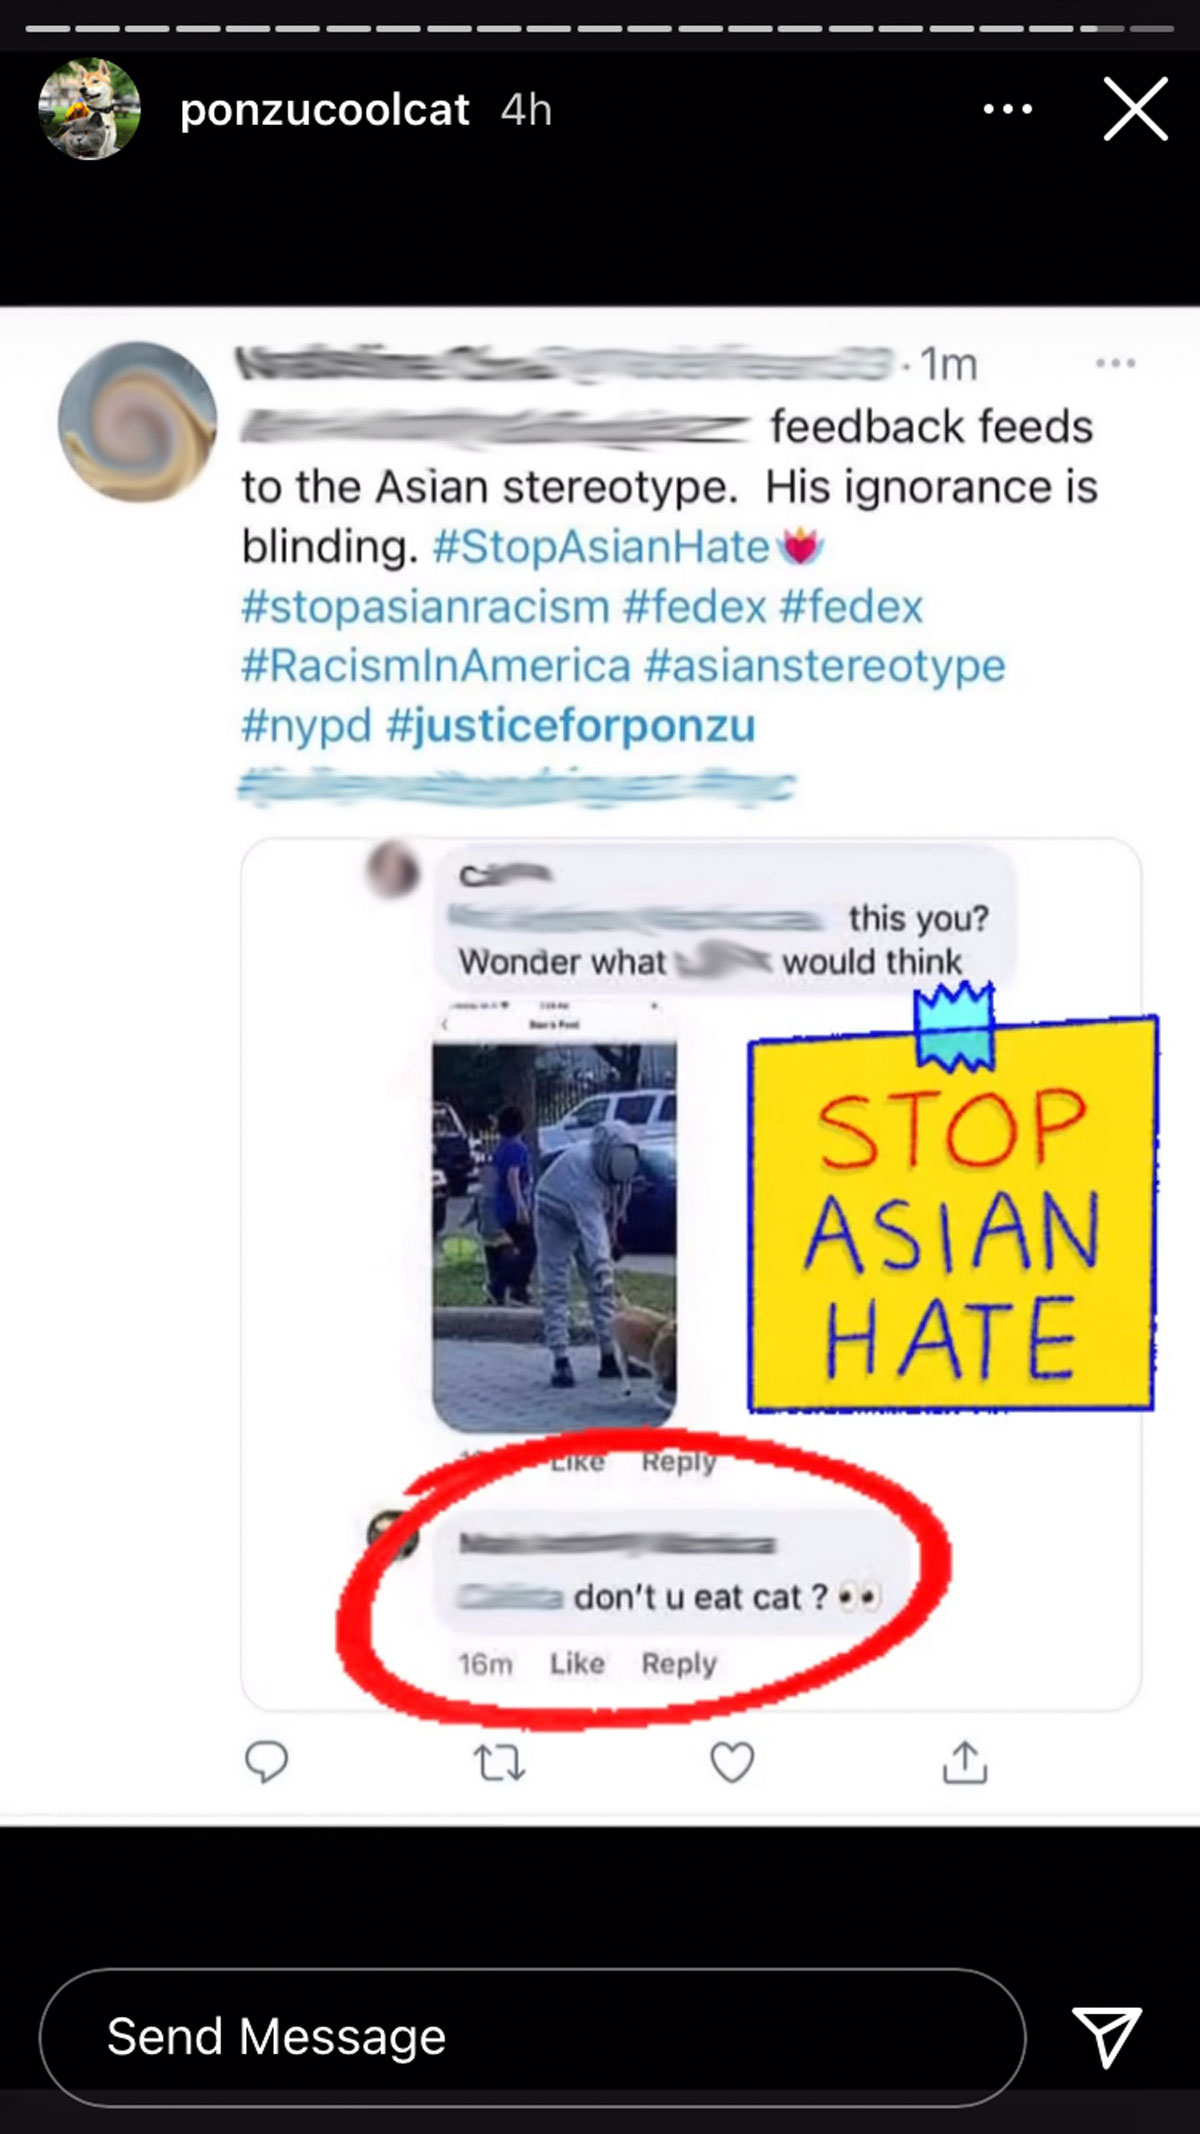 Ponzu Cool Cat's owners reveal disturbing anti-Asian hate messages on social media reportedly from attacker family!